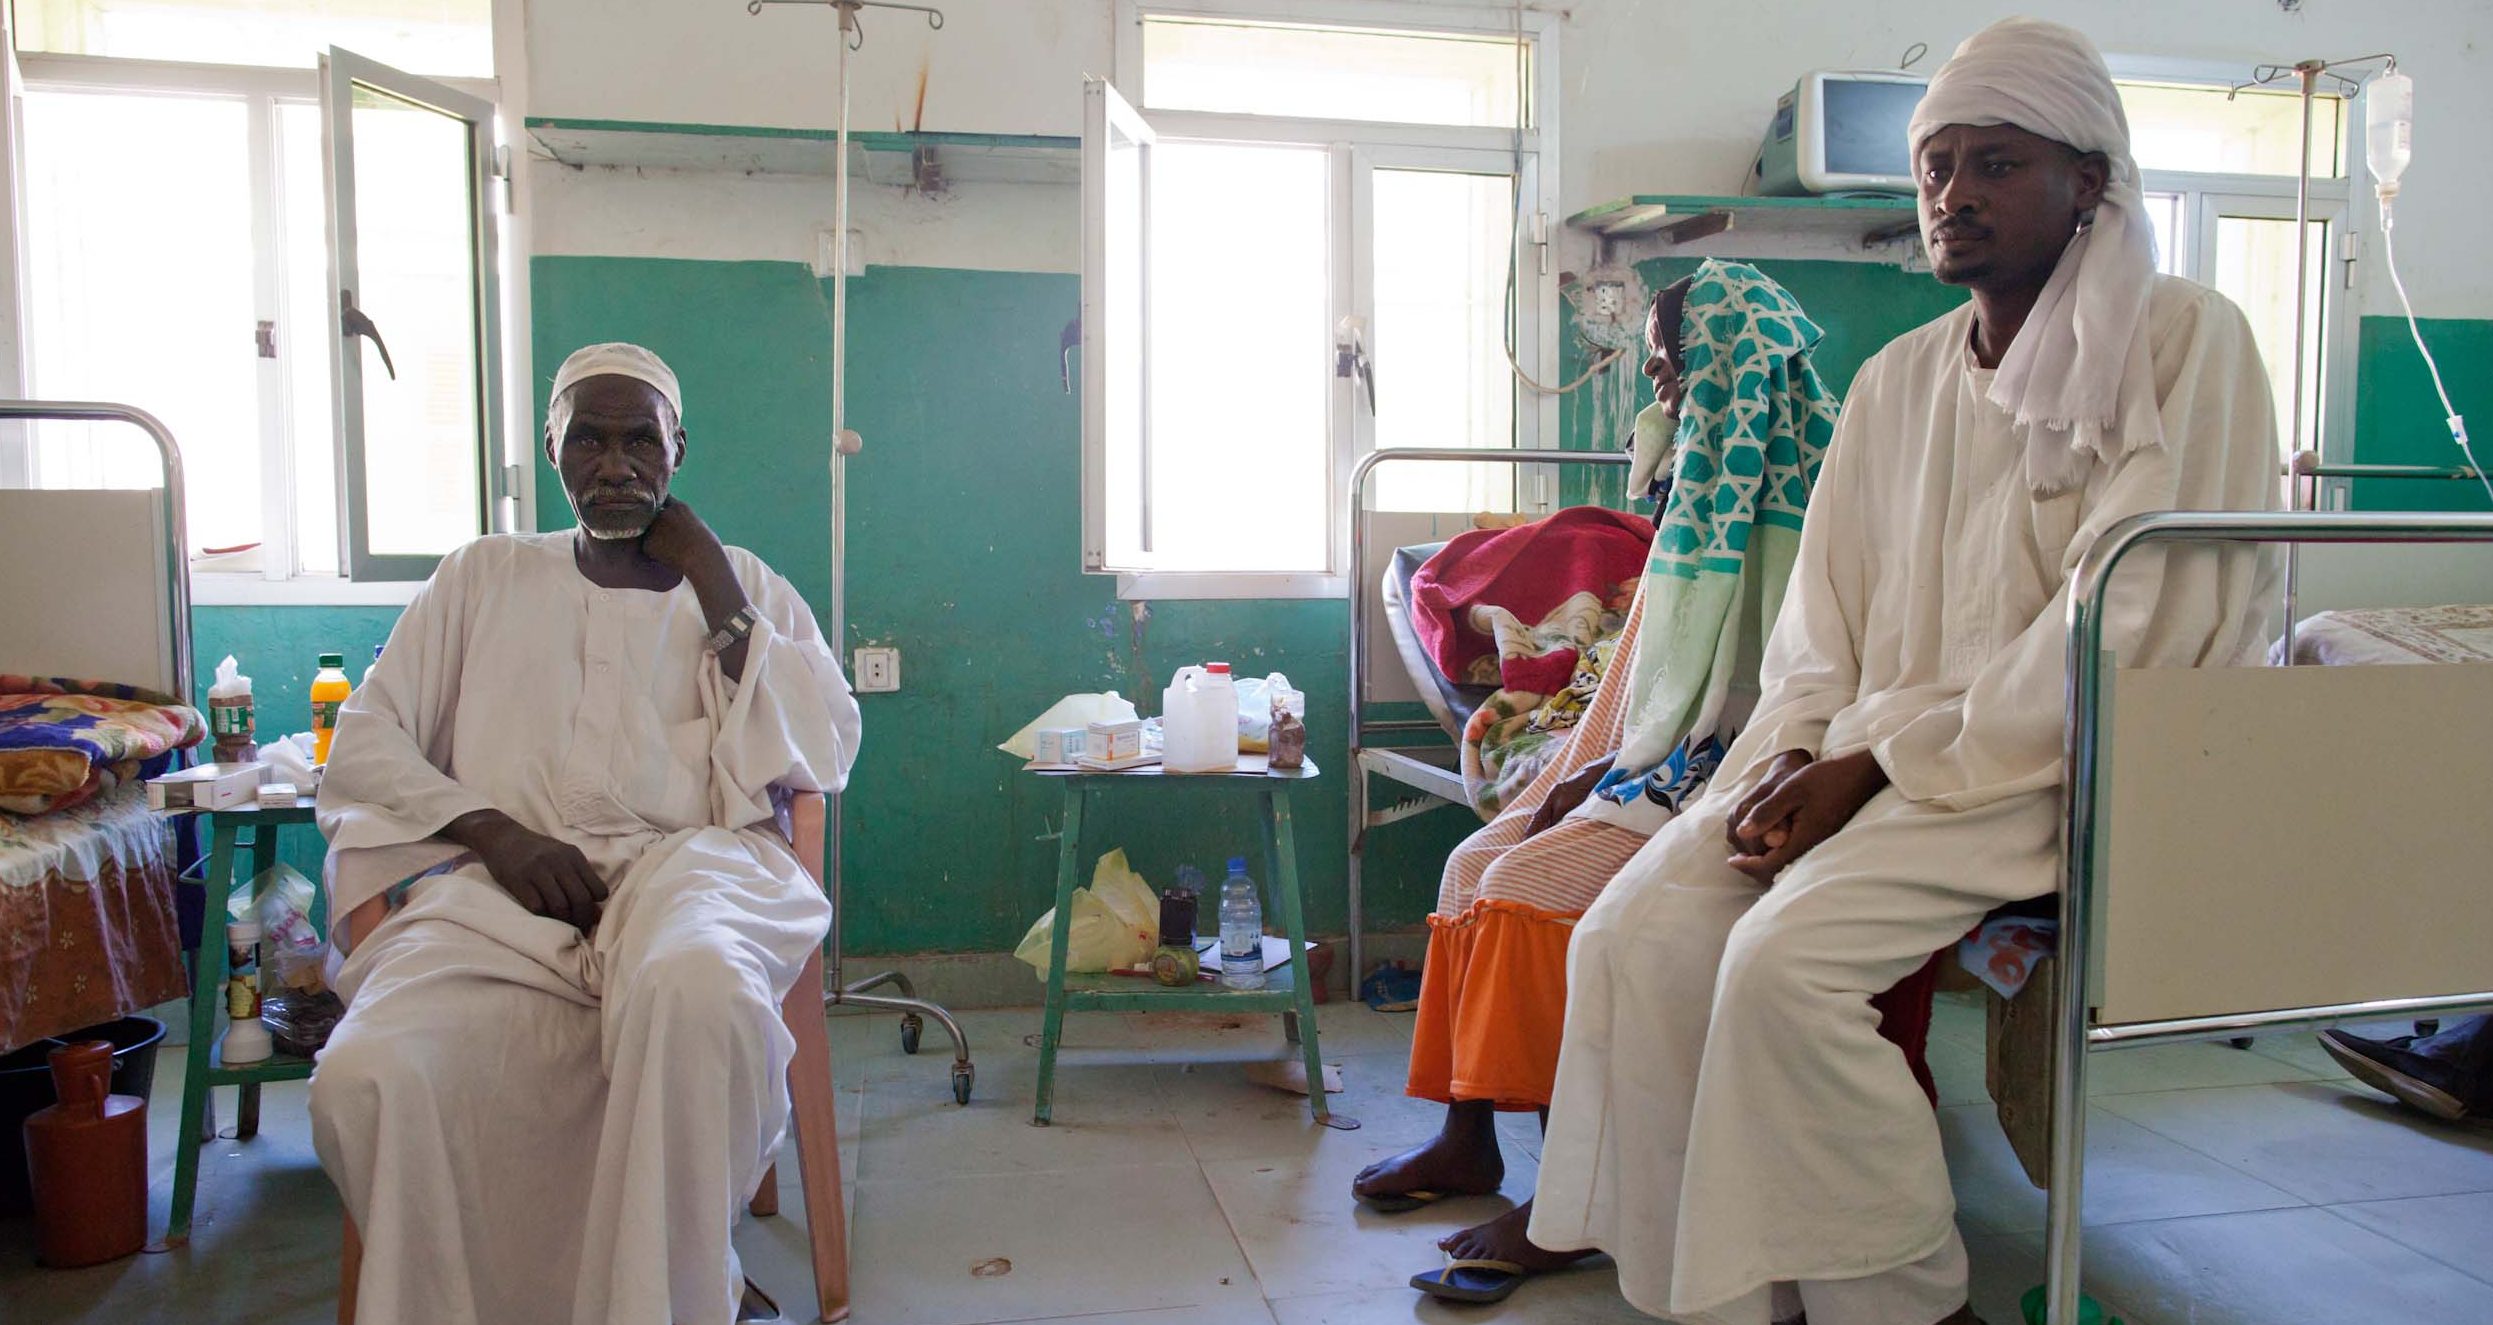 An African women and man sit on a hospital bed while a man sits on a chair, staring at the camera